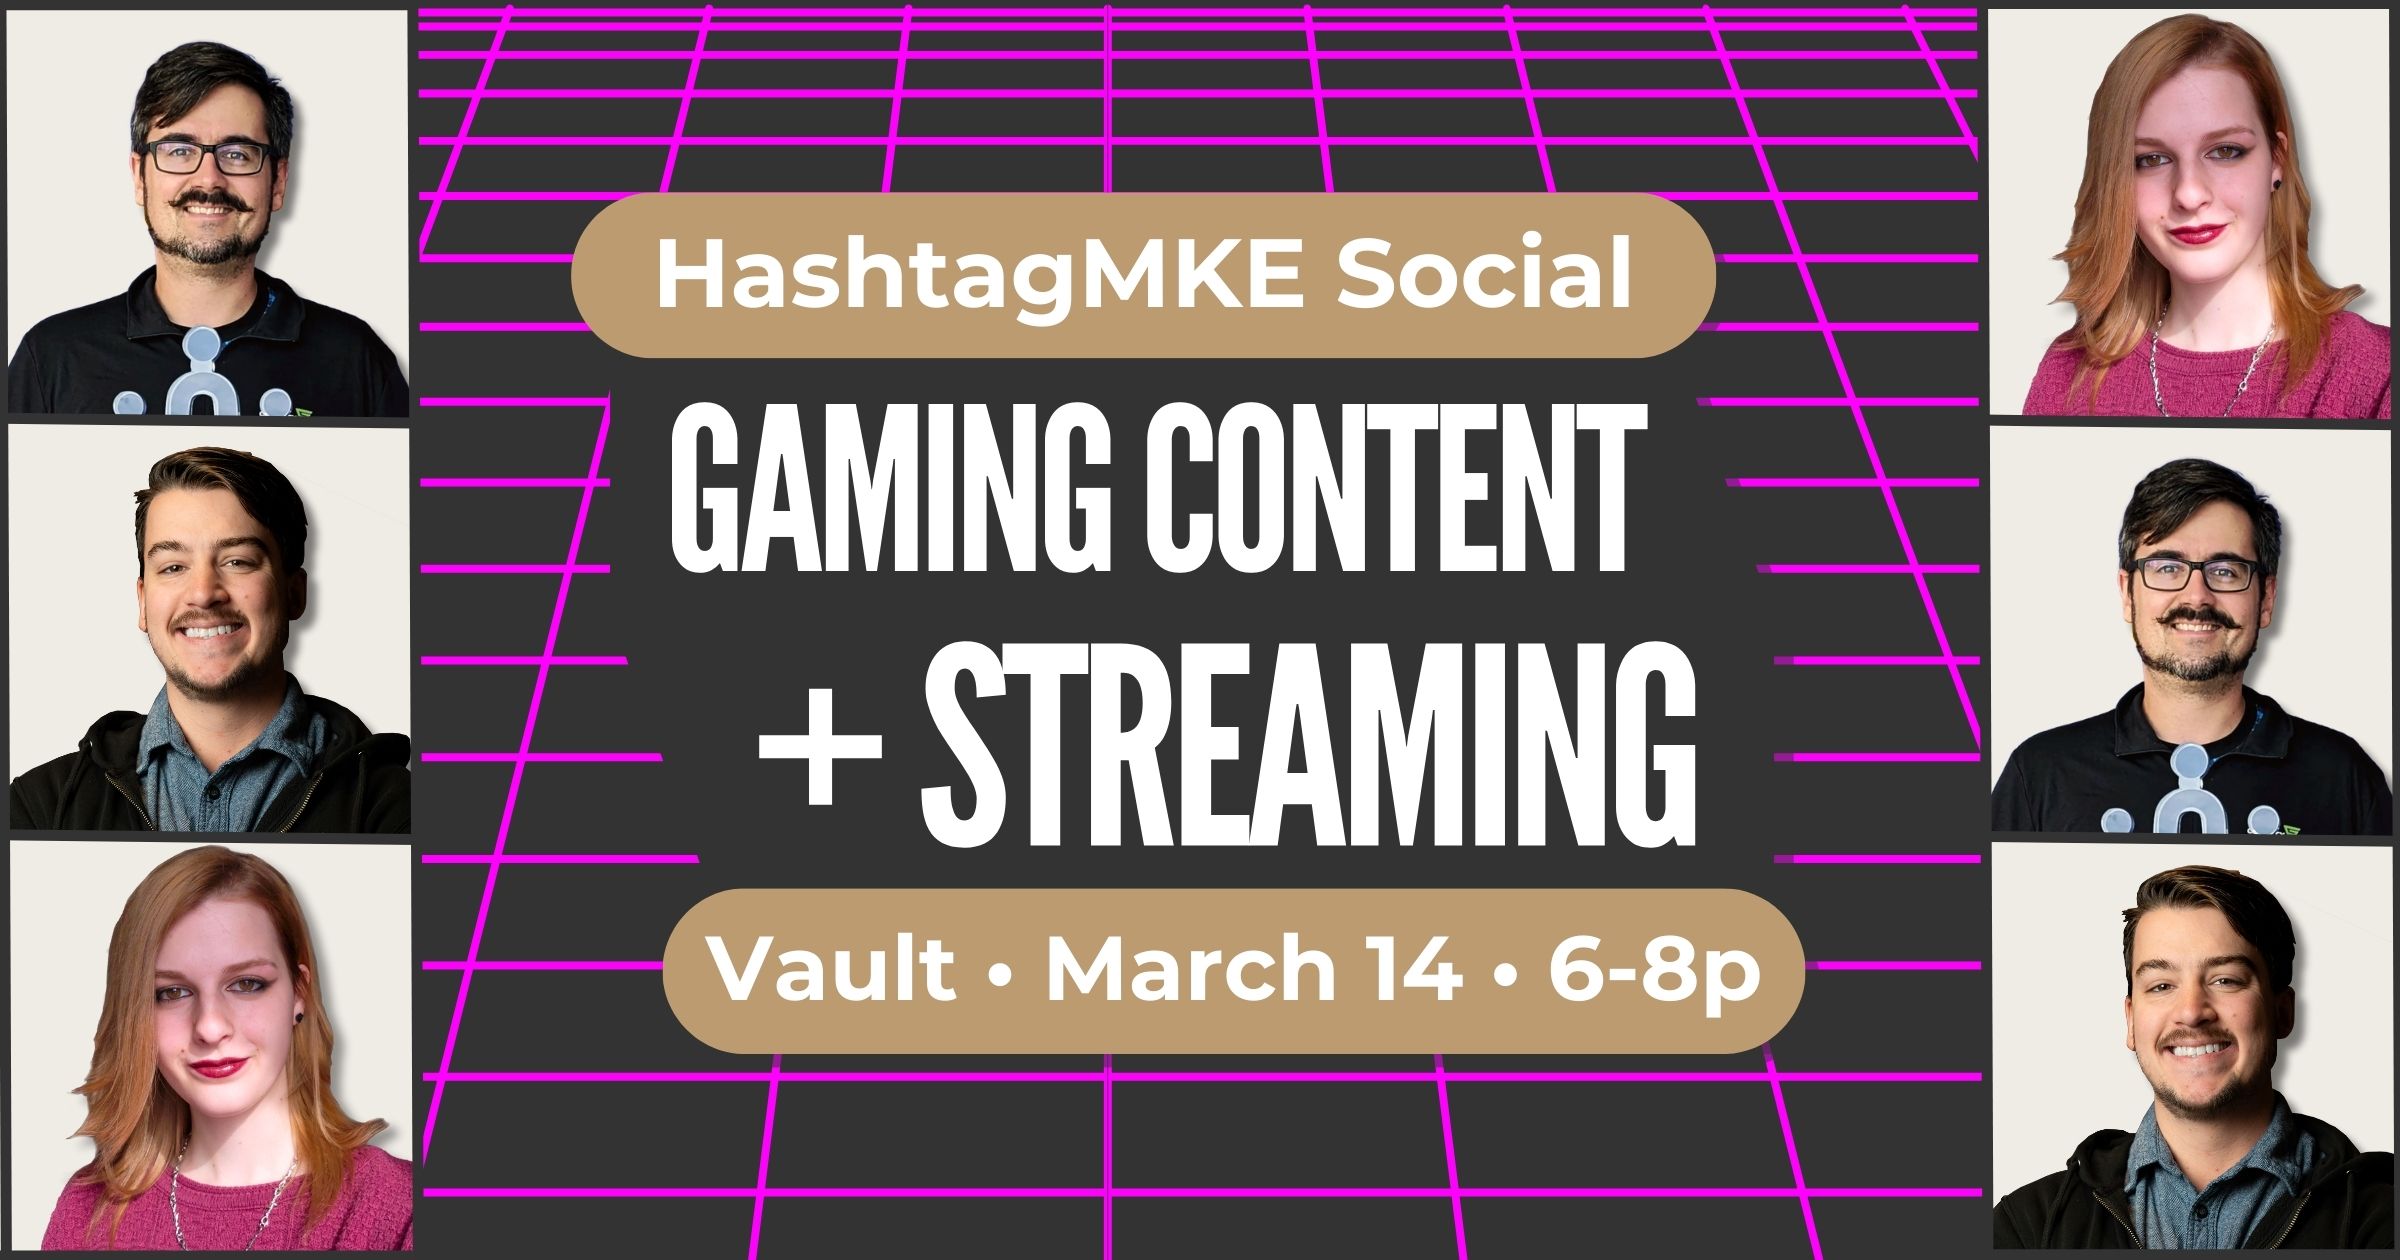 "HashtagMKE Social on Gaming Content and Streaming at Vault on March 14 from 6 to 8 p.m." with a headshot of Mike Dahl, Matt Curtis, and Raven Rohne.